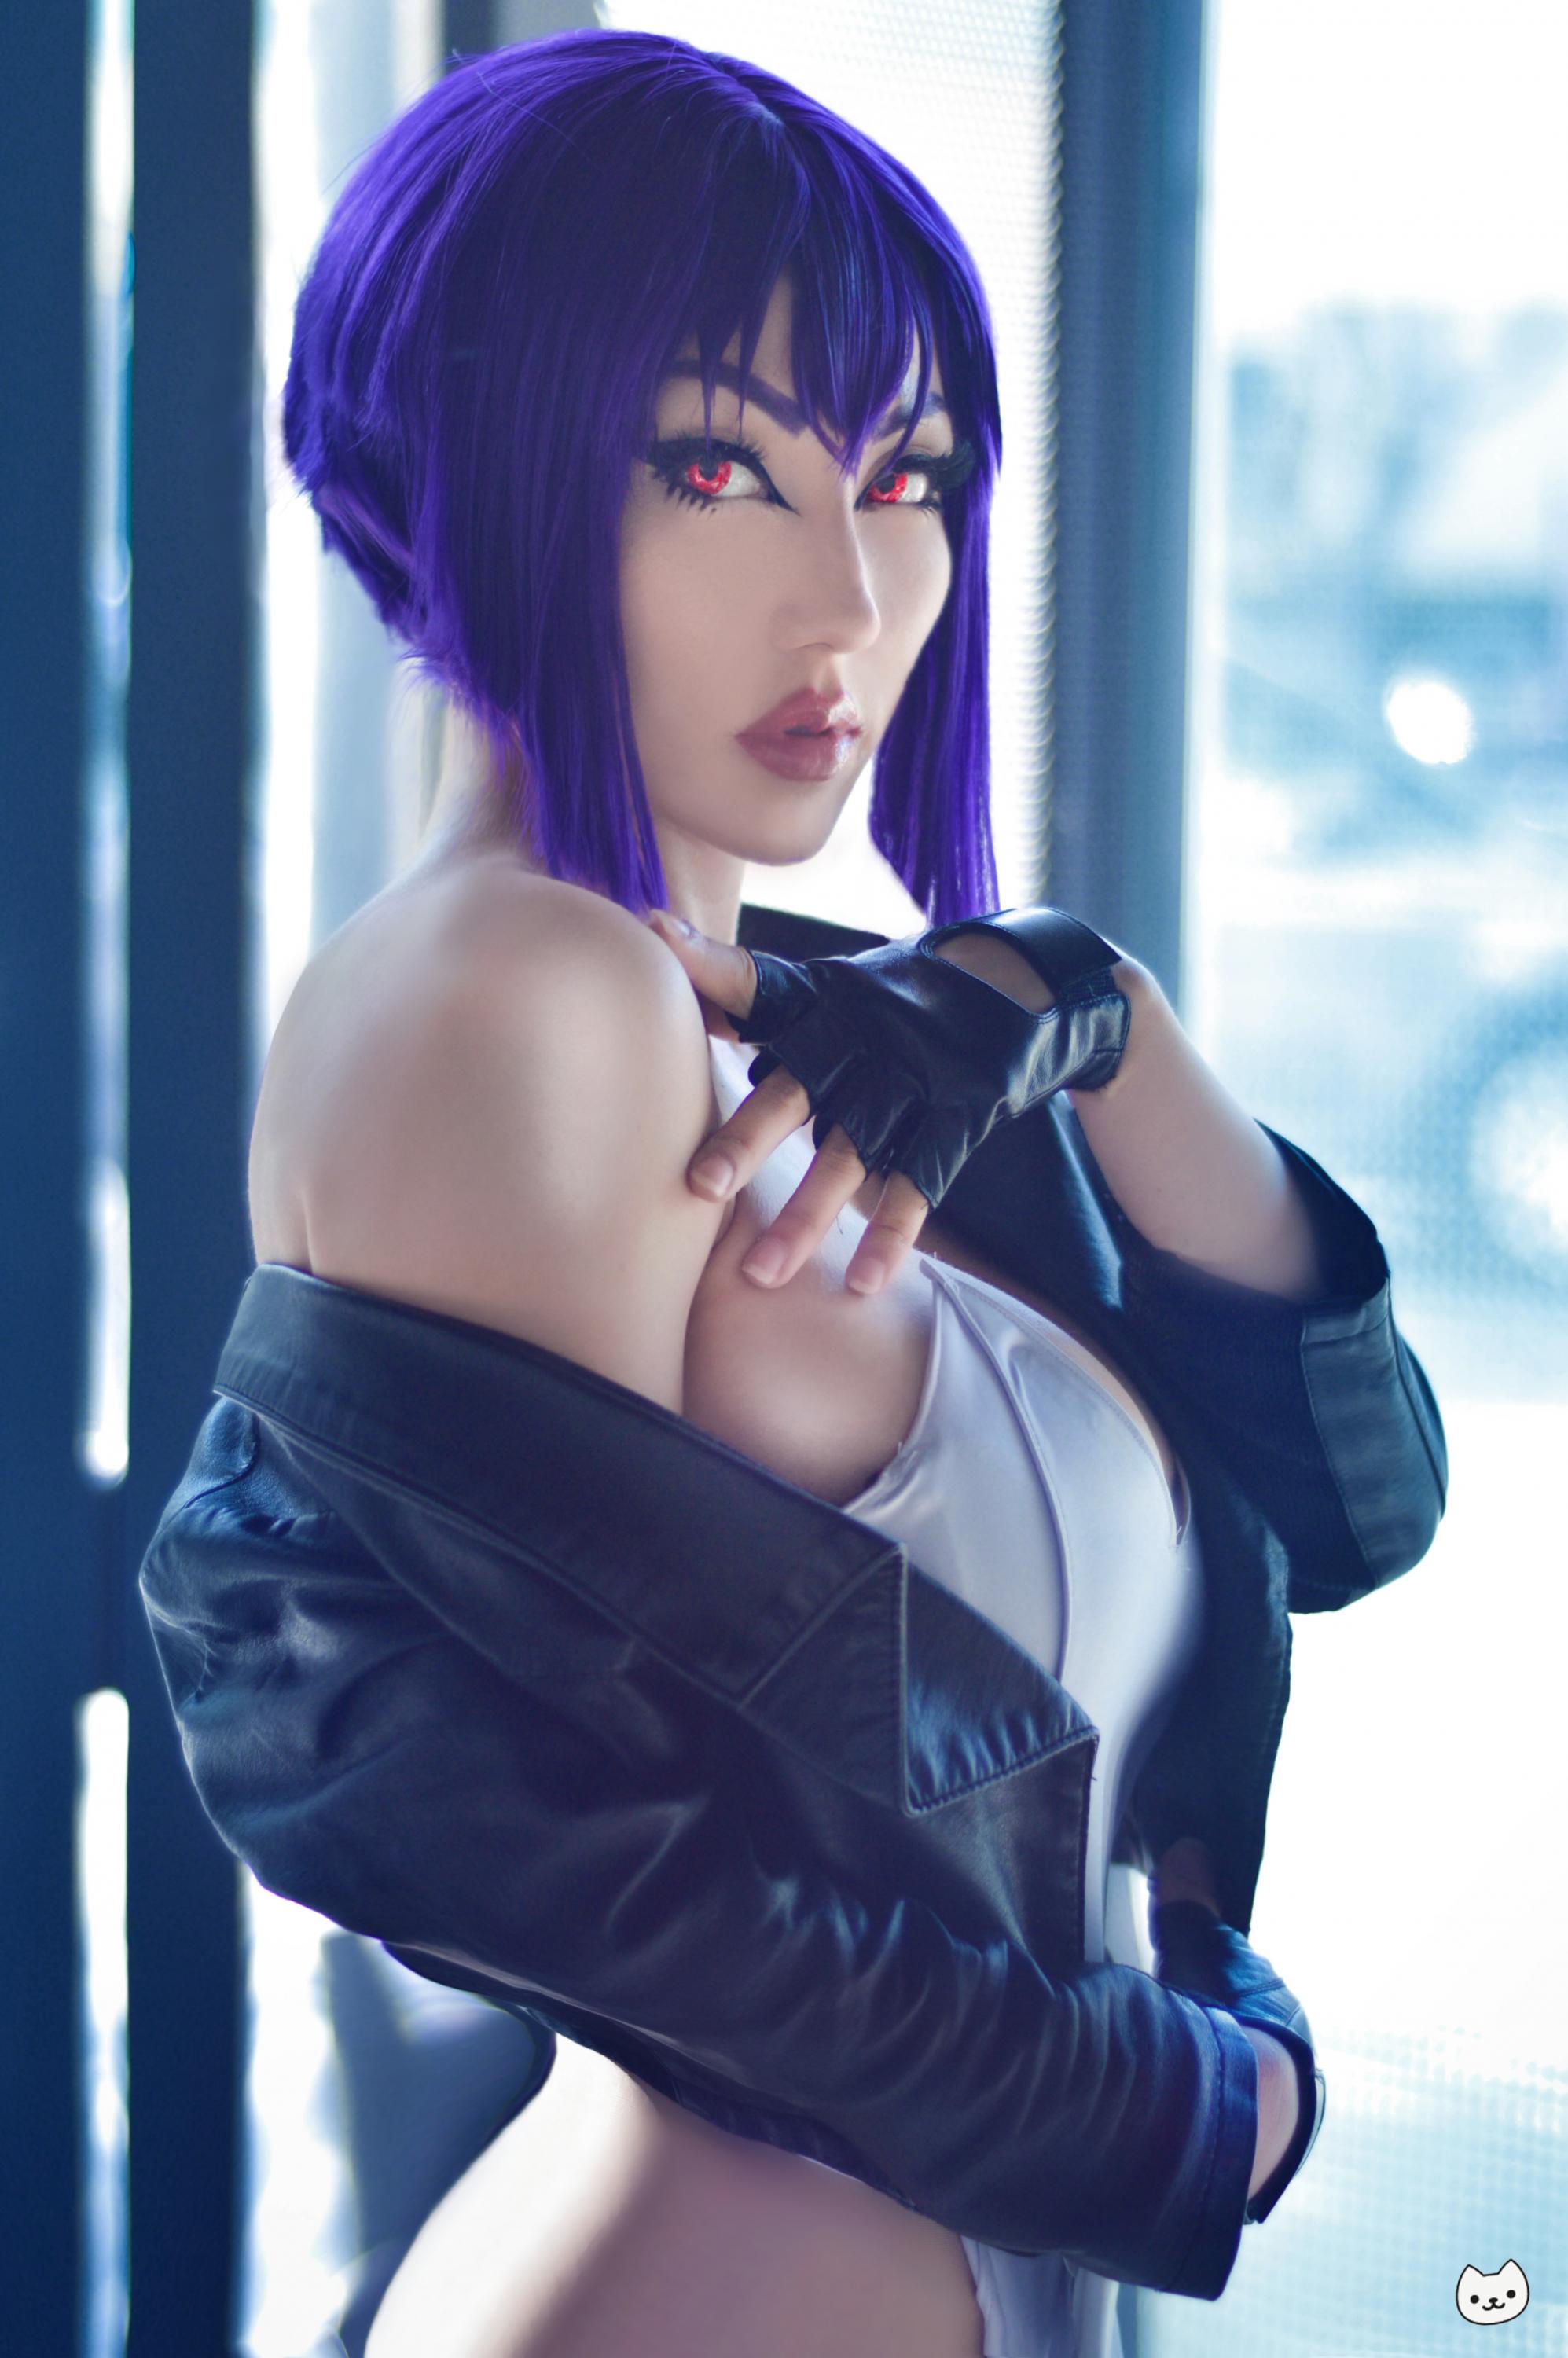 Motoko from Ghost in the Shell